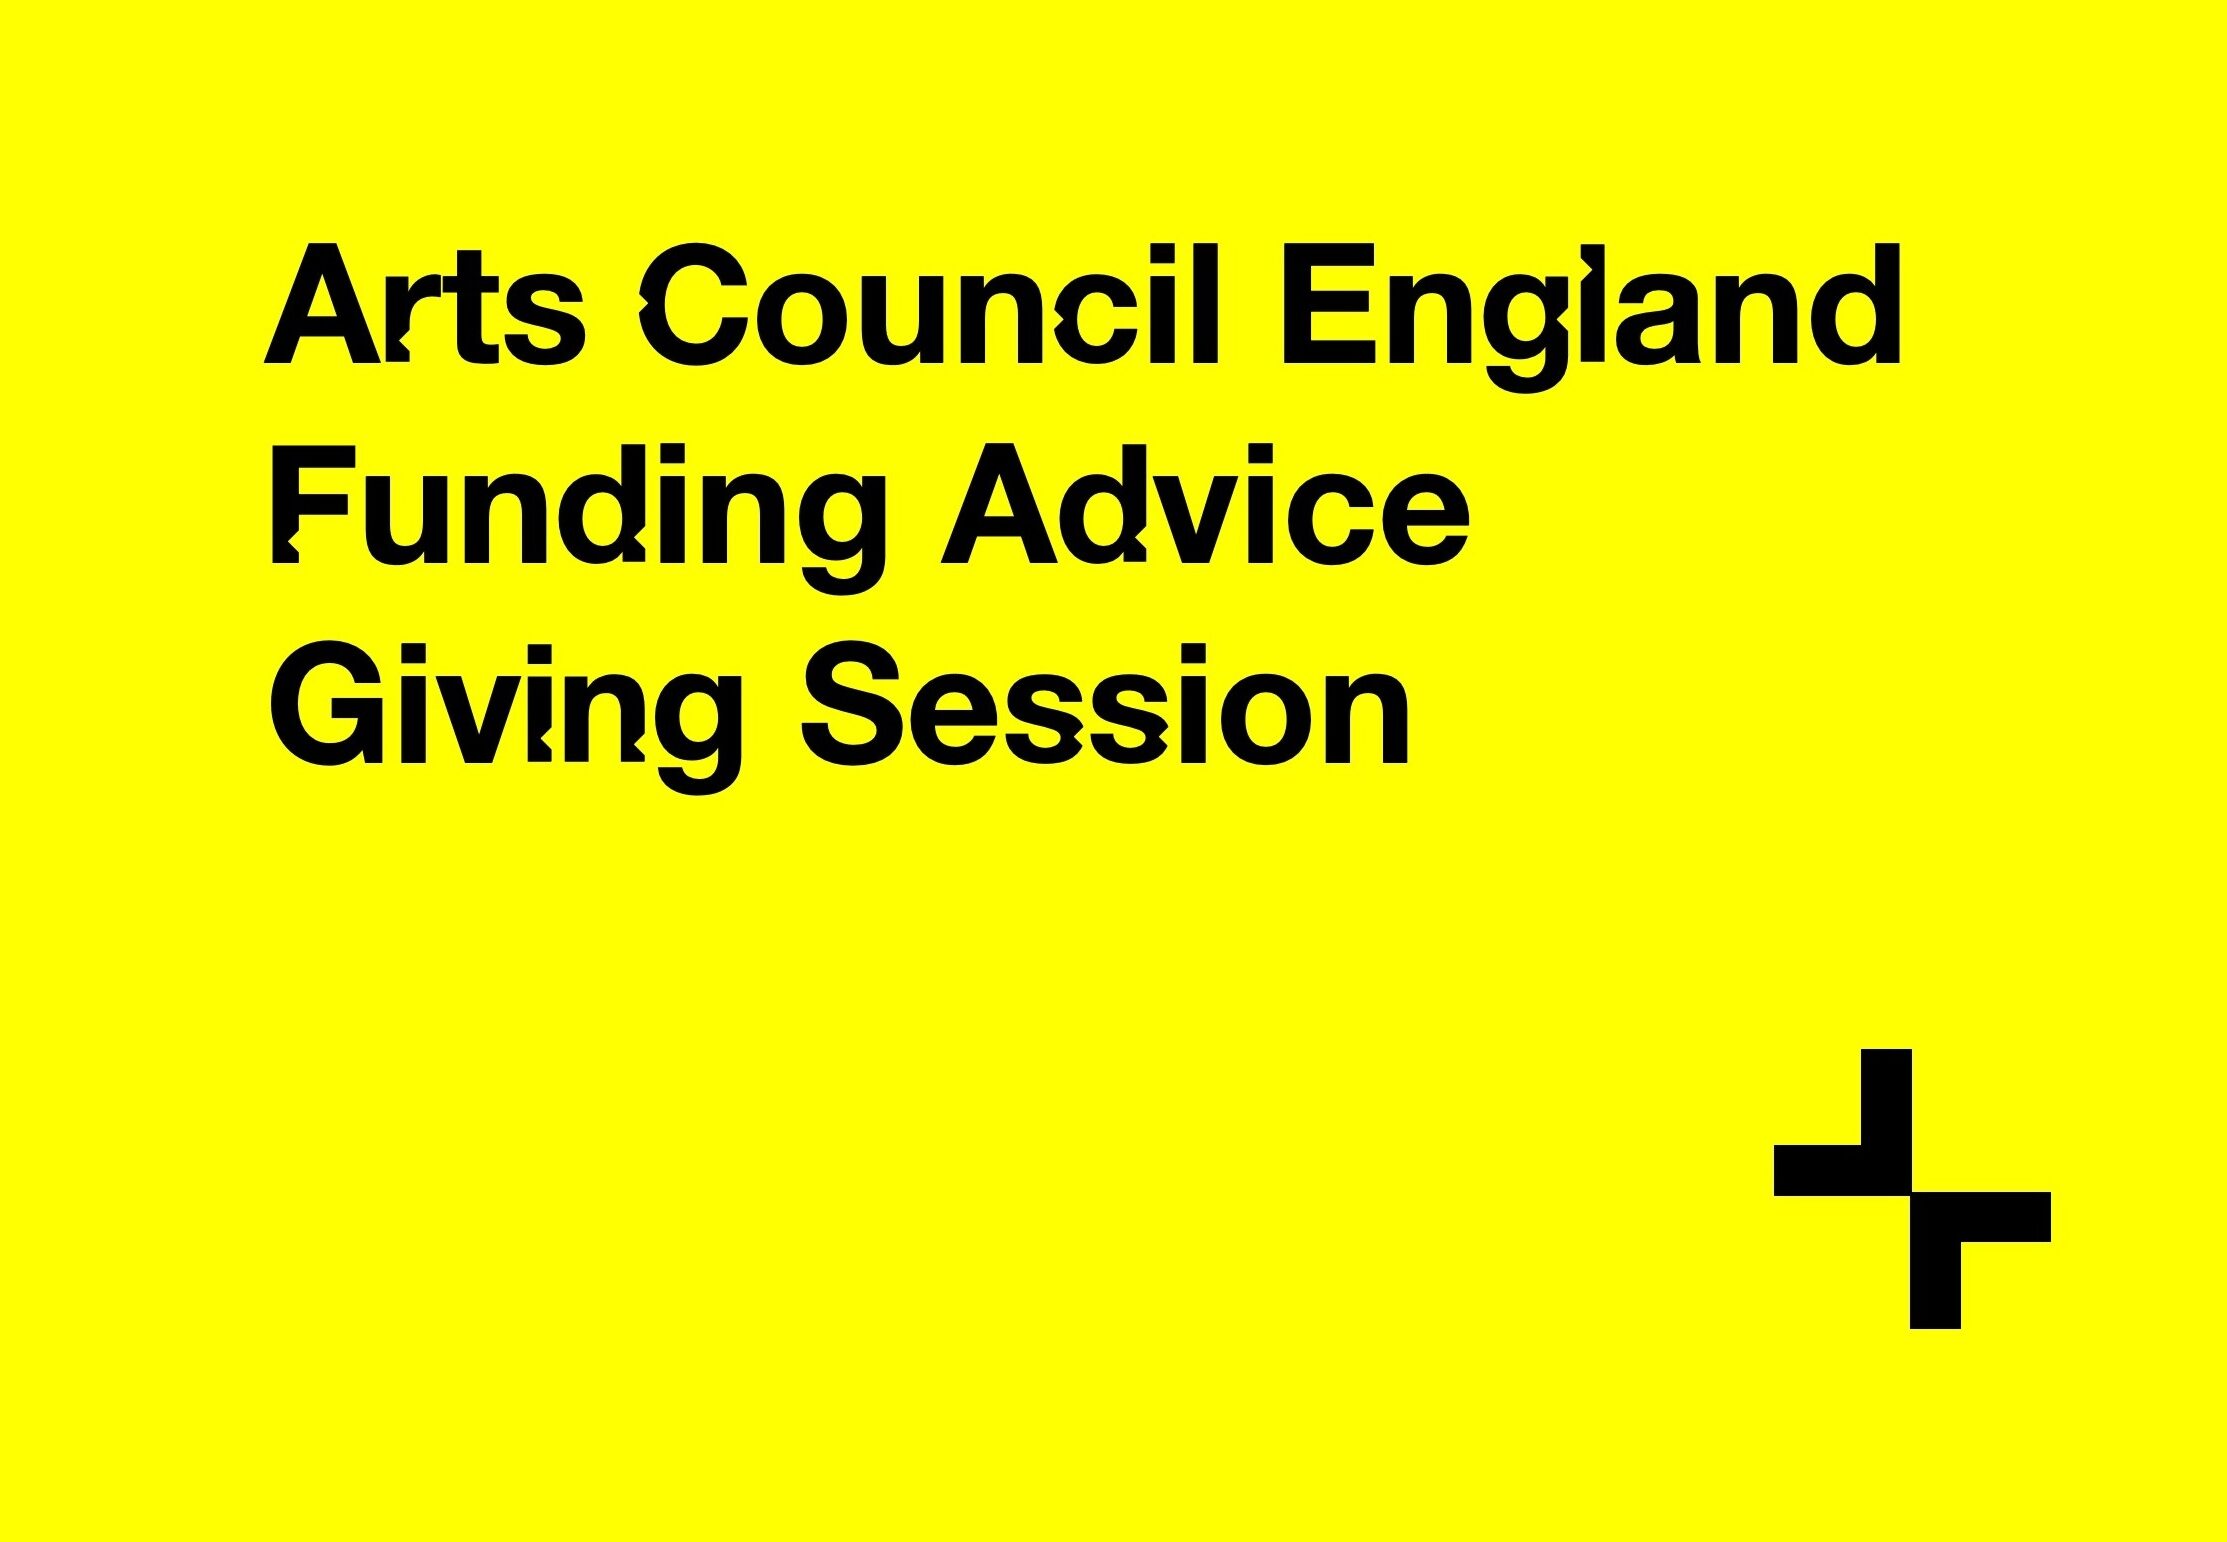 Arts Council England Funding Advice Giving Session